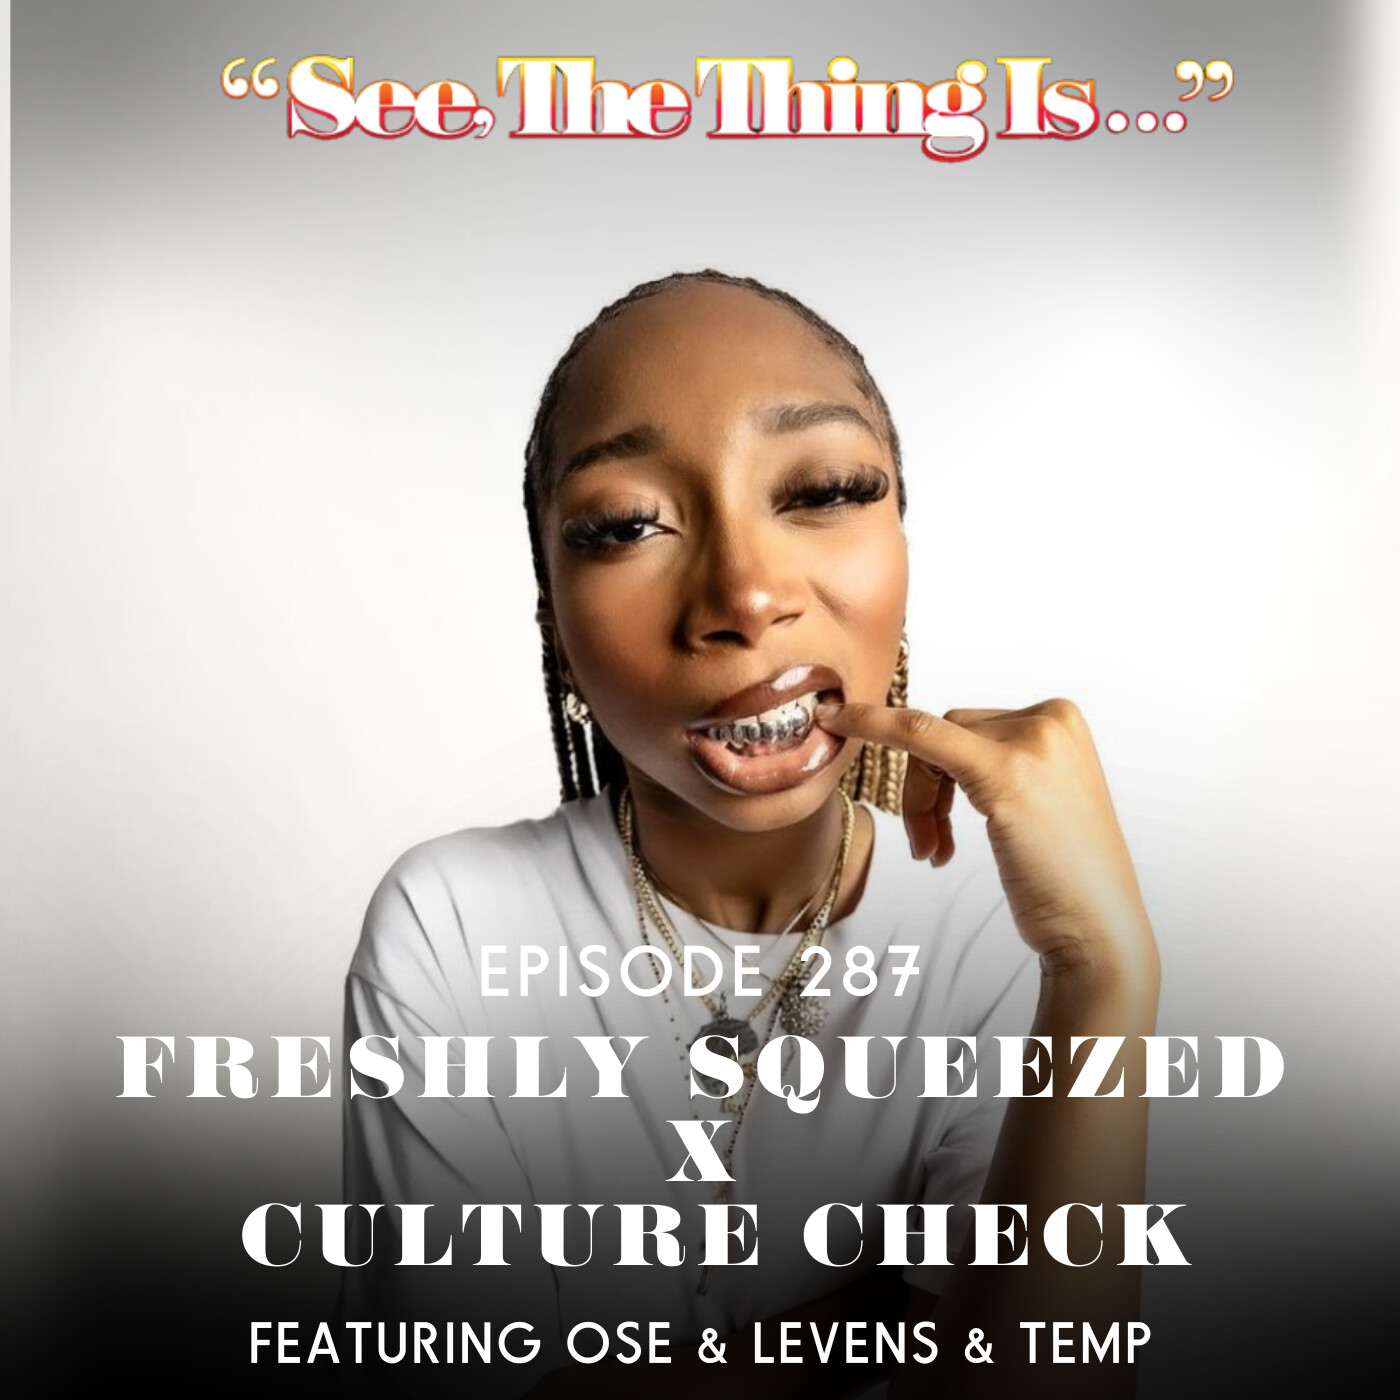 Freshly Squeezed Feat. Osé and Levens X Culture Check Feat. Temp